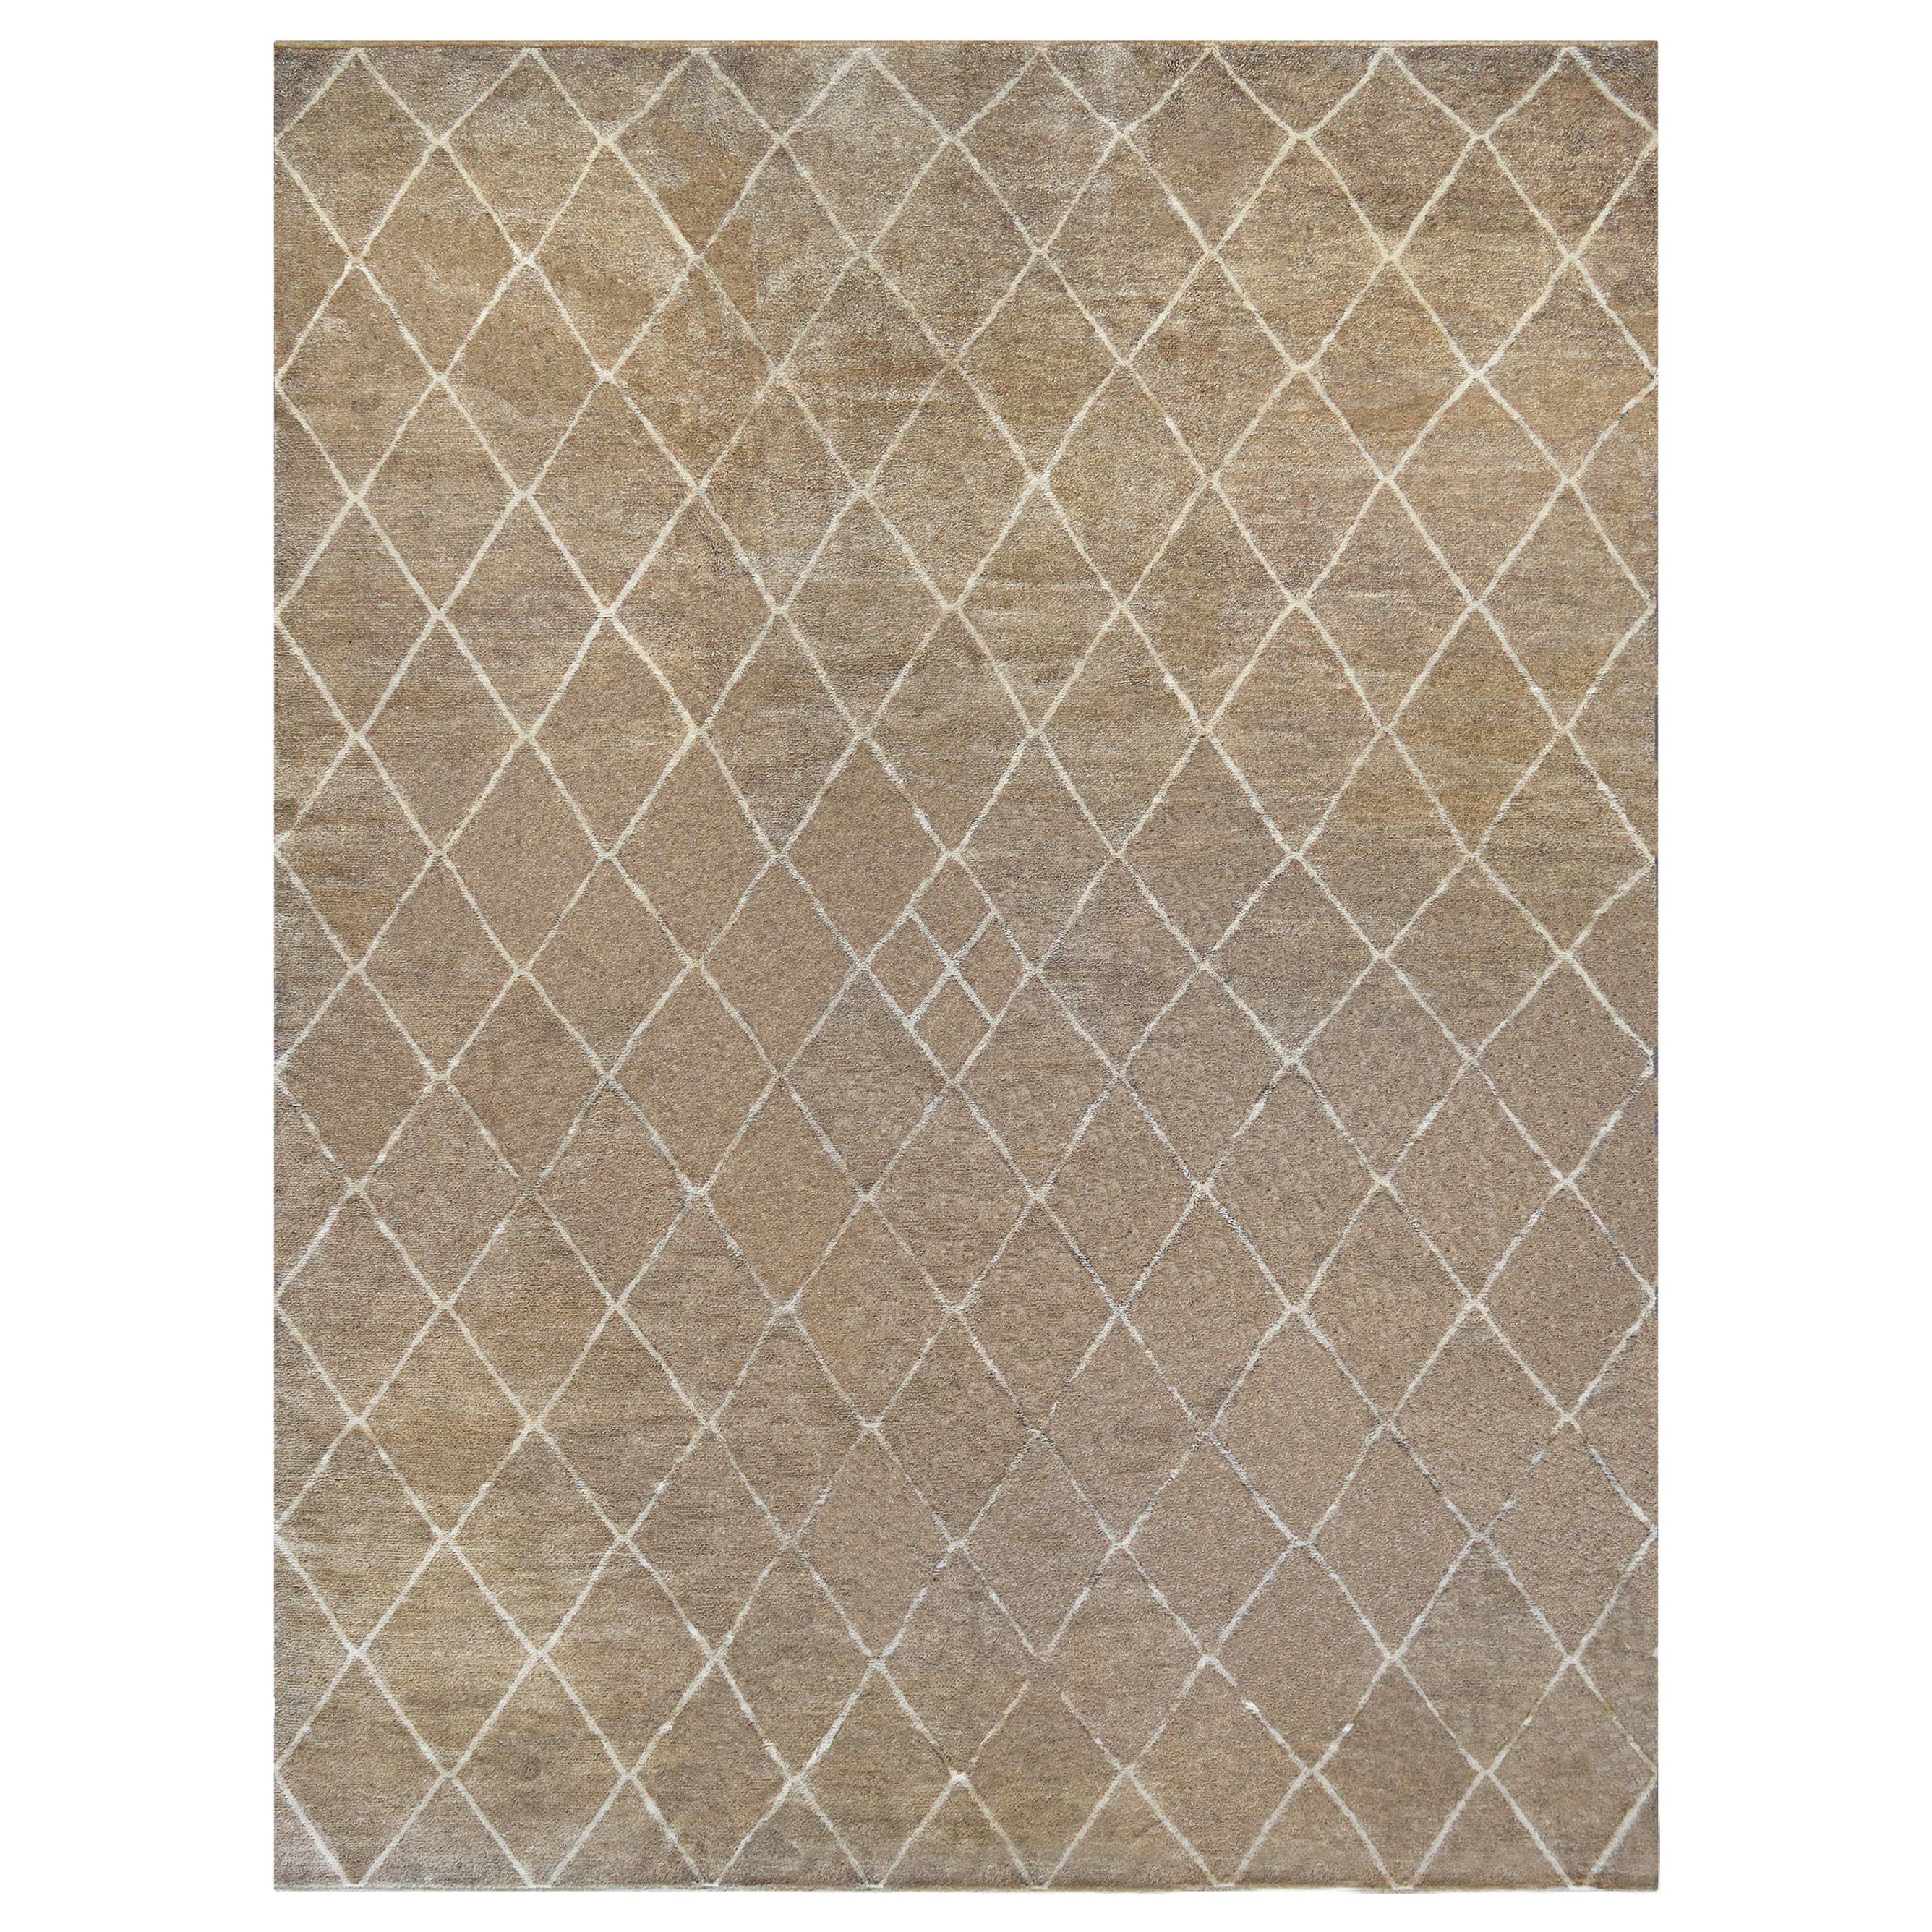 Handwoven Moroccan Inspired Wool Rug For Sale